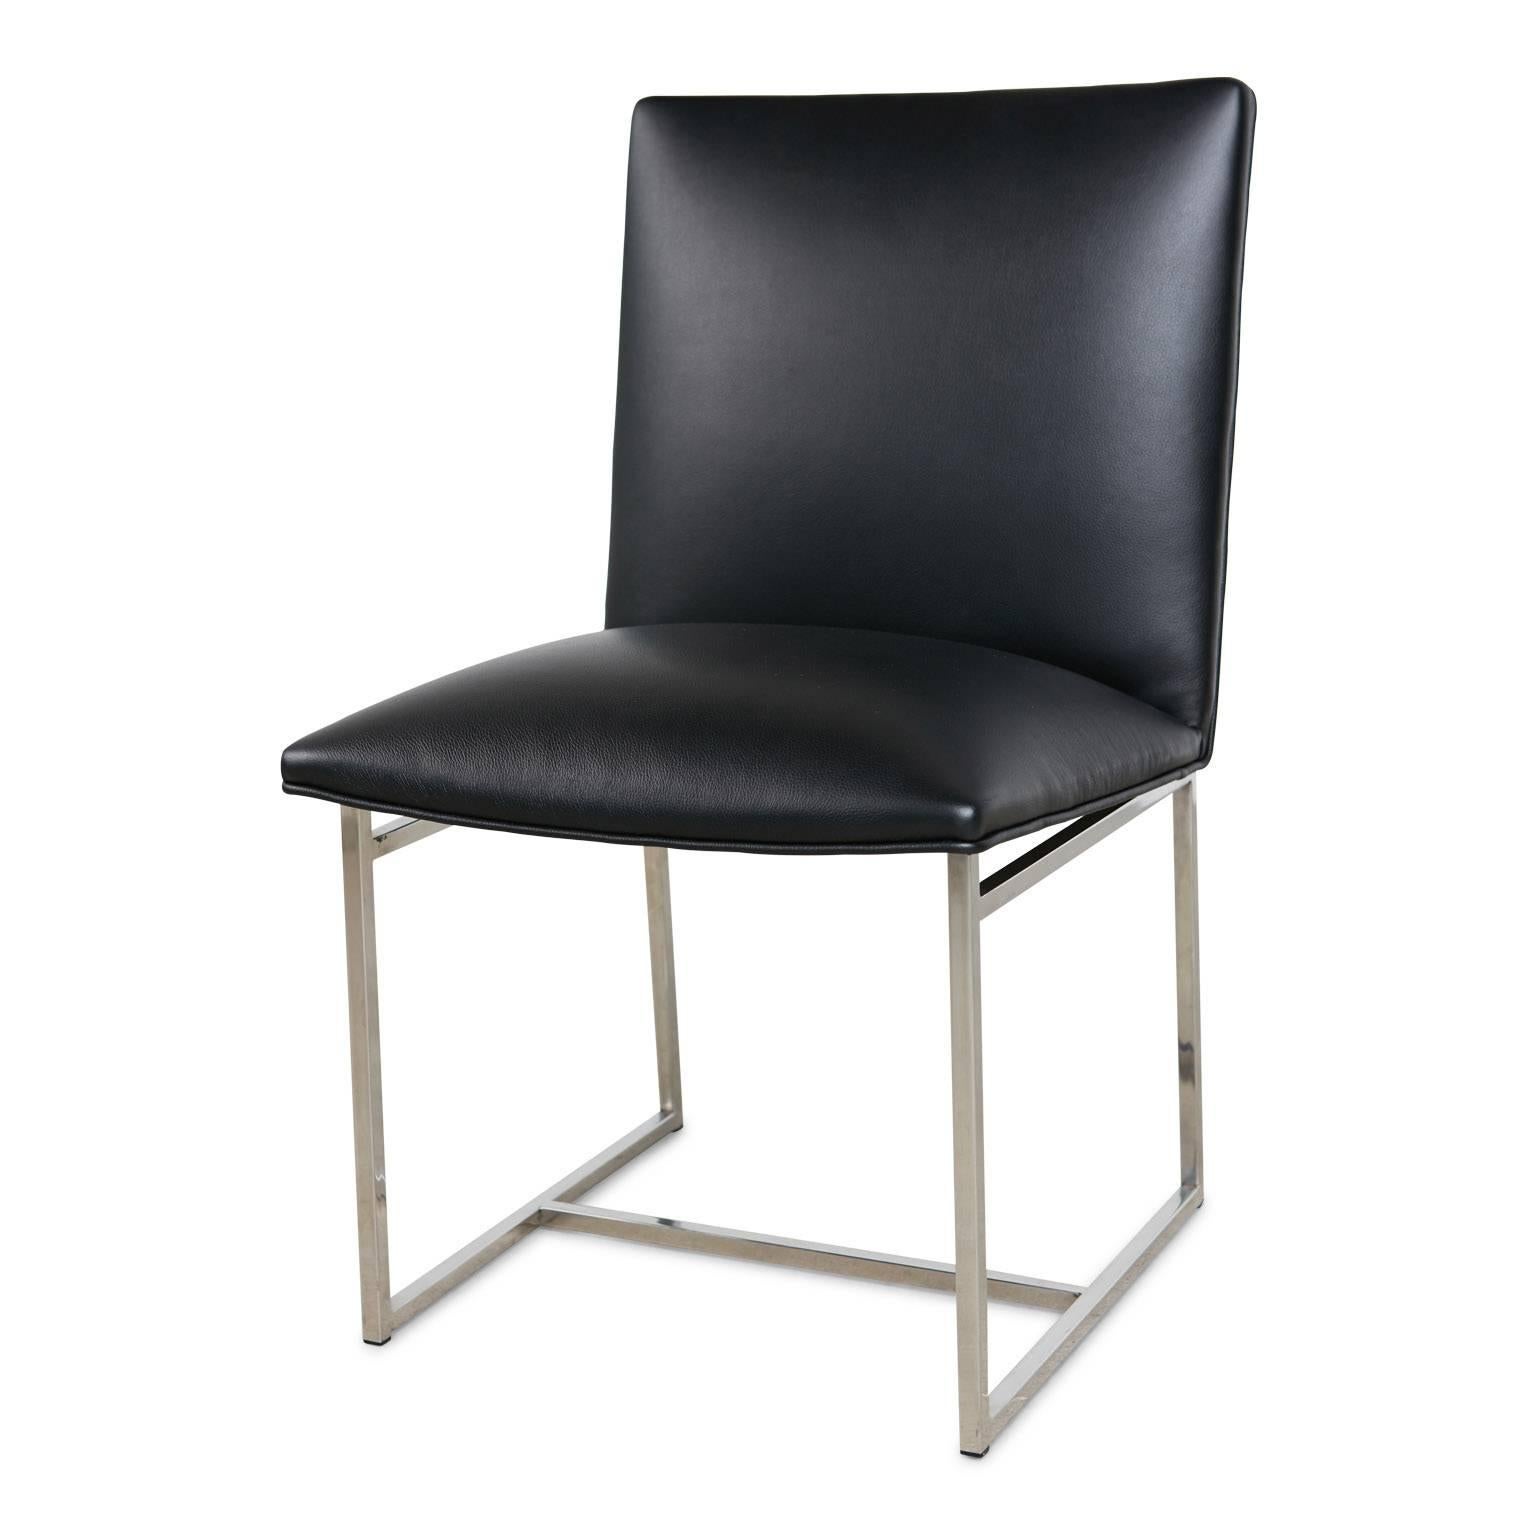 Chrome Set Milo Baughman 8 Dining Chairs Reupholstered in Edelman Leather, circa 1970